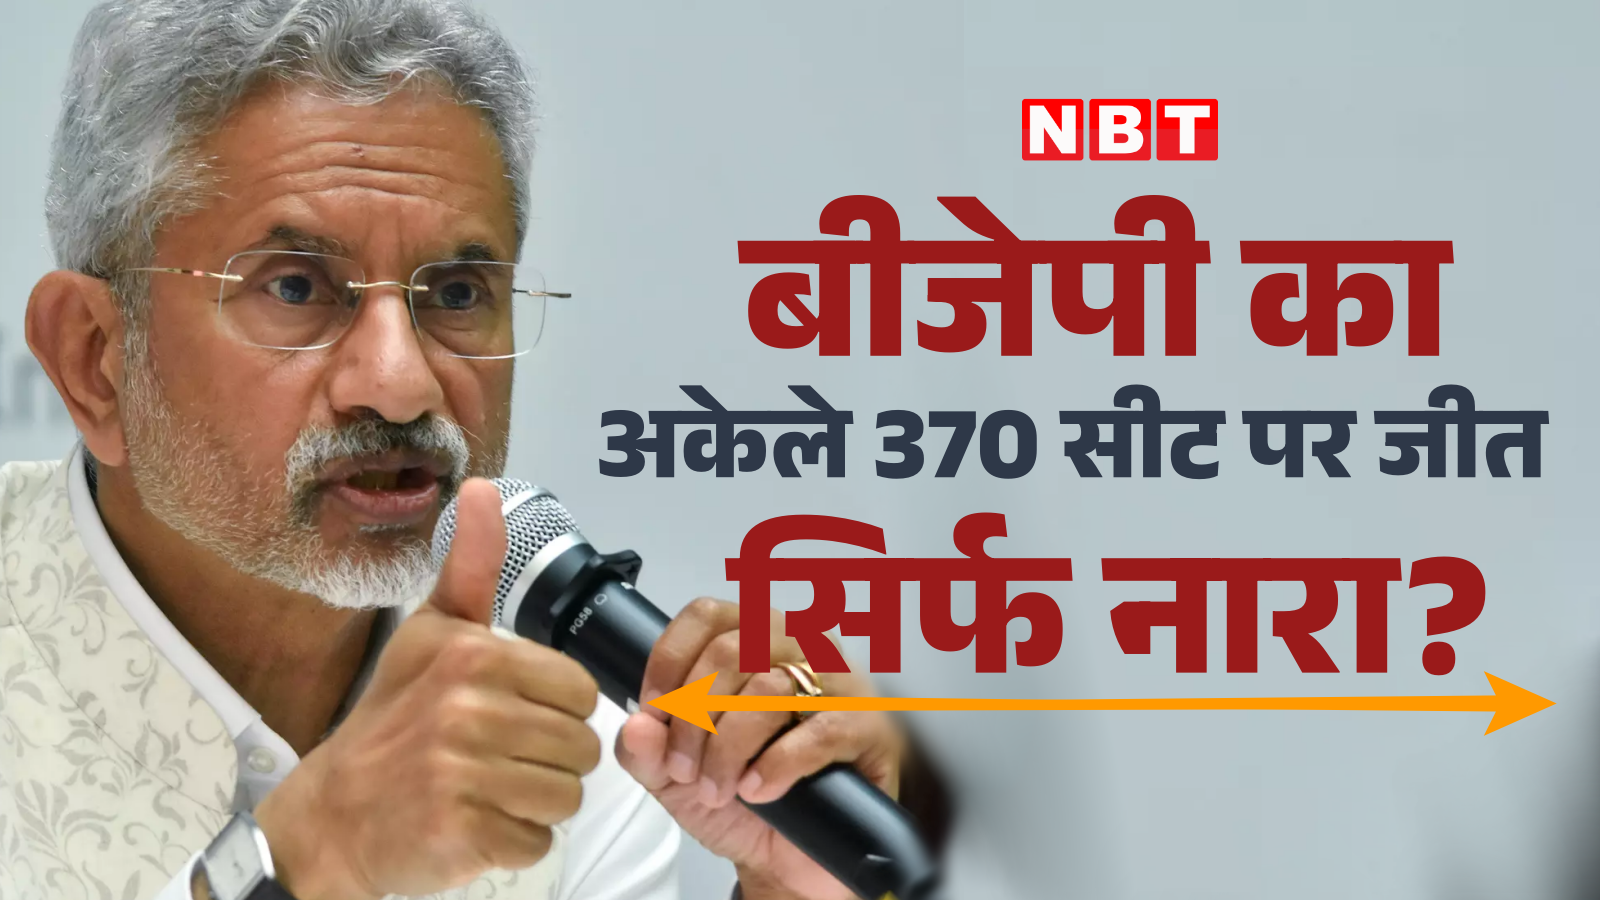 Where did the figure of BJP winning 370 seats alone come from? S Jaishankar explained the reason